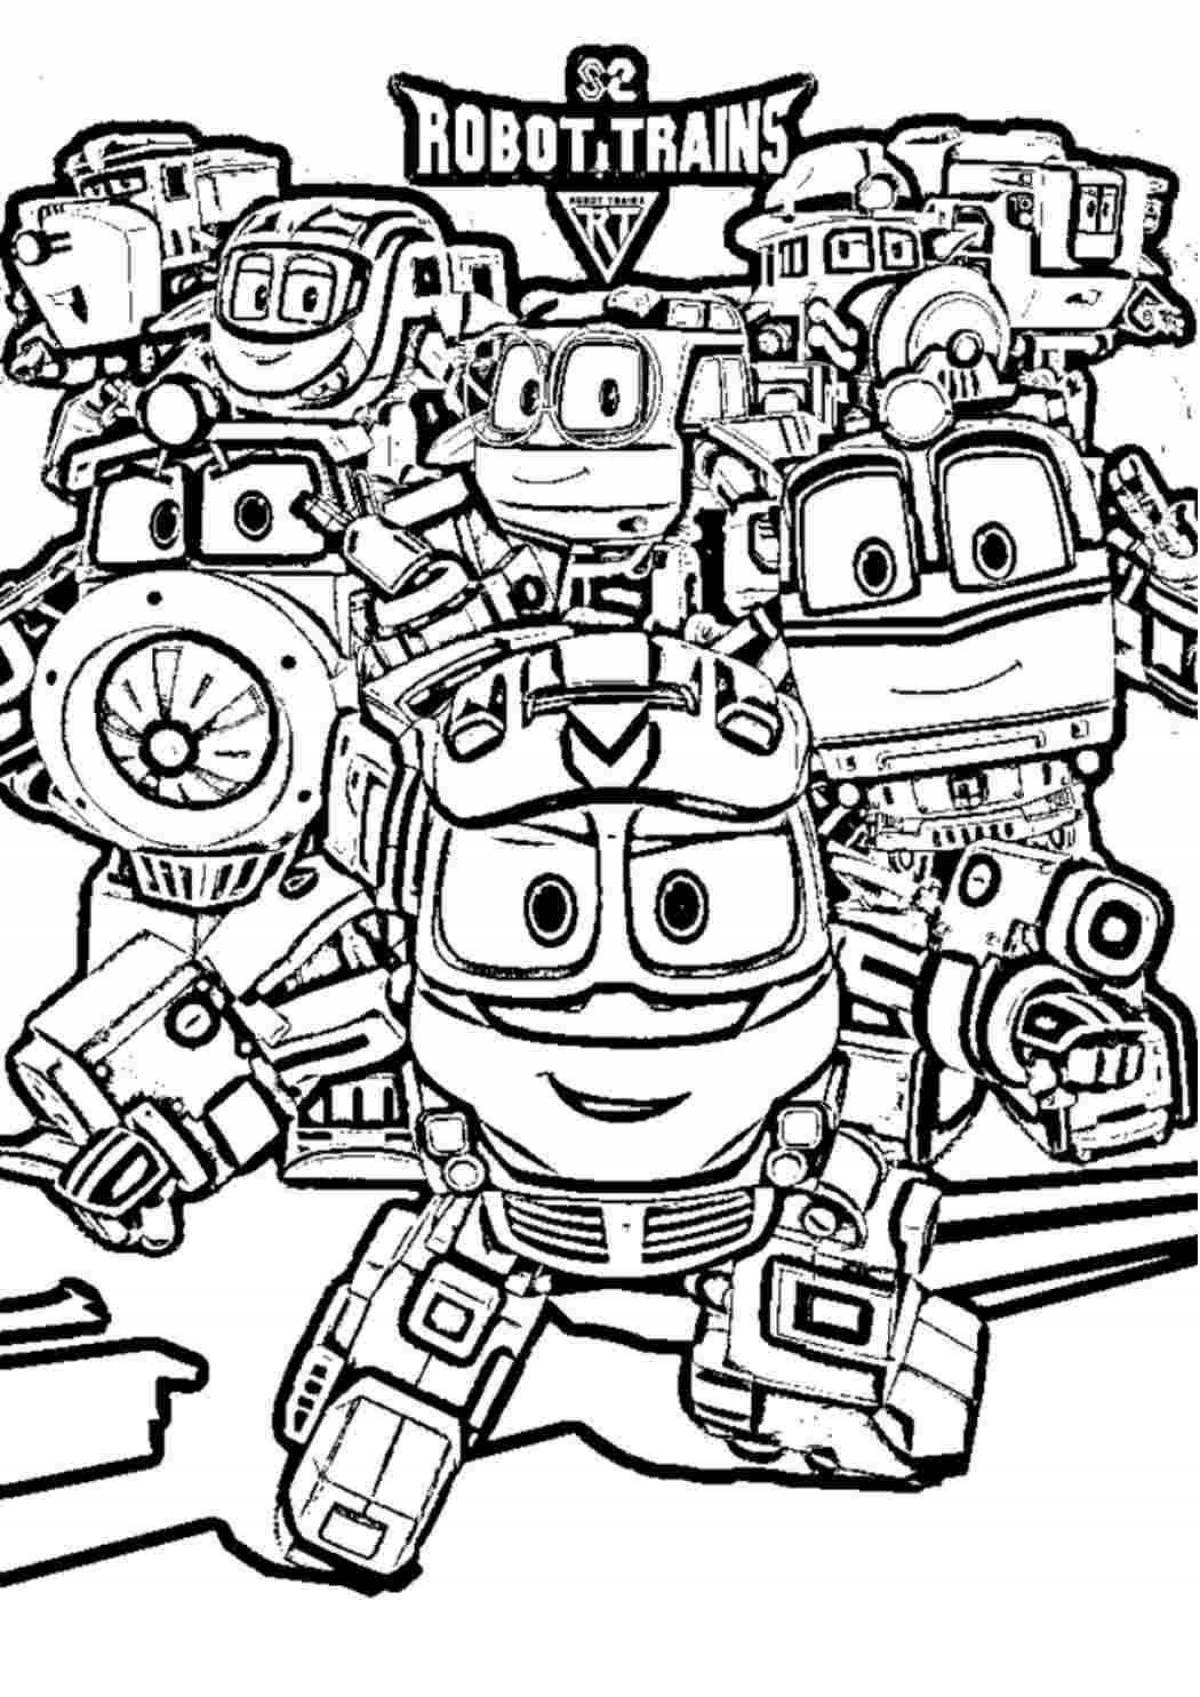 Coloring page awesome maxi robot trains